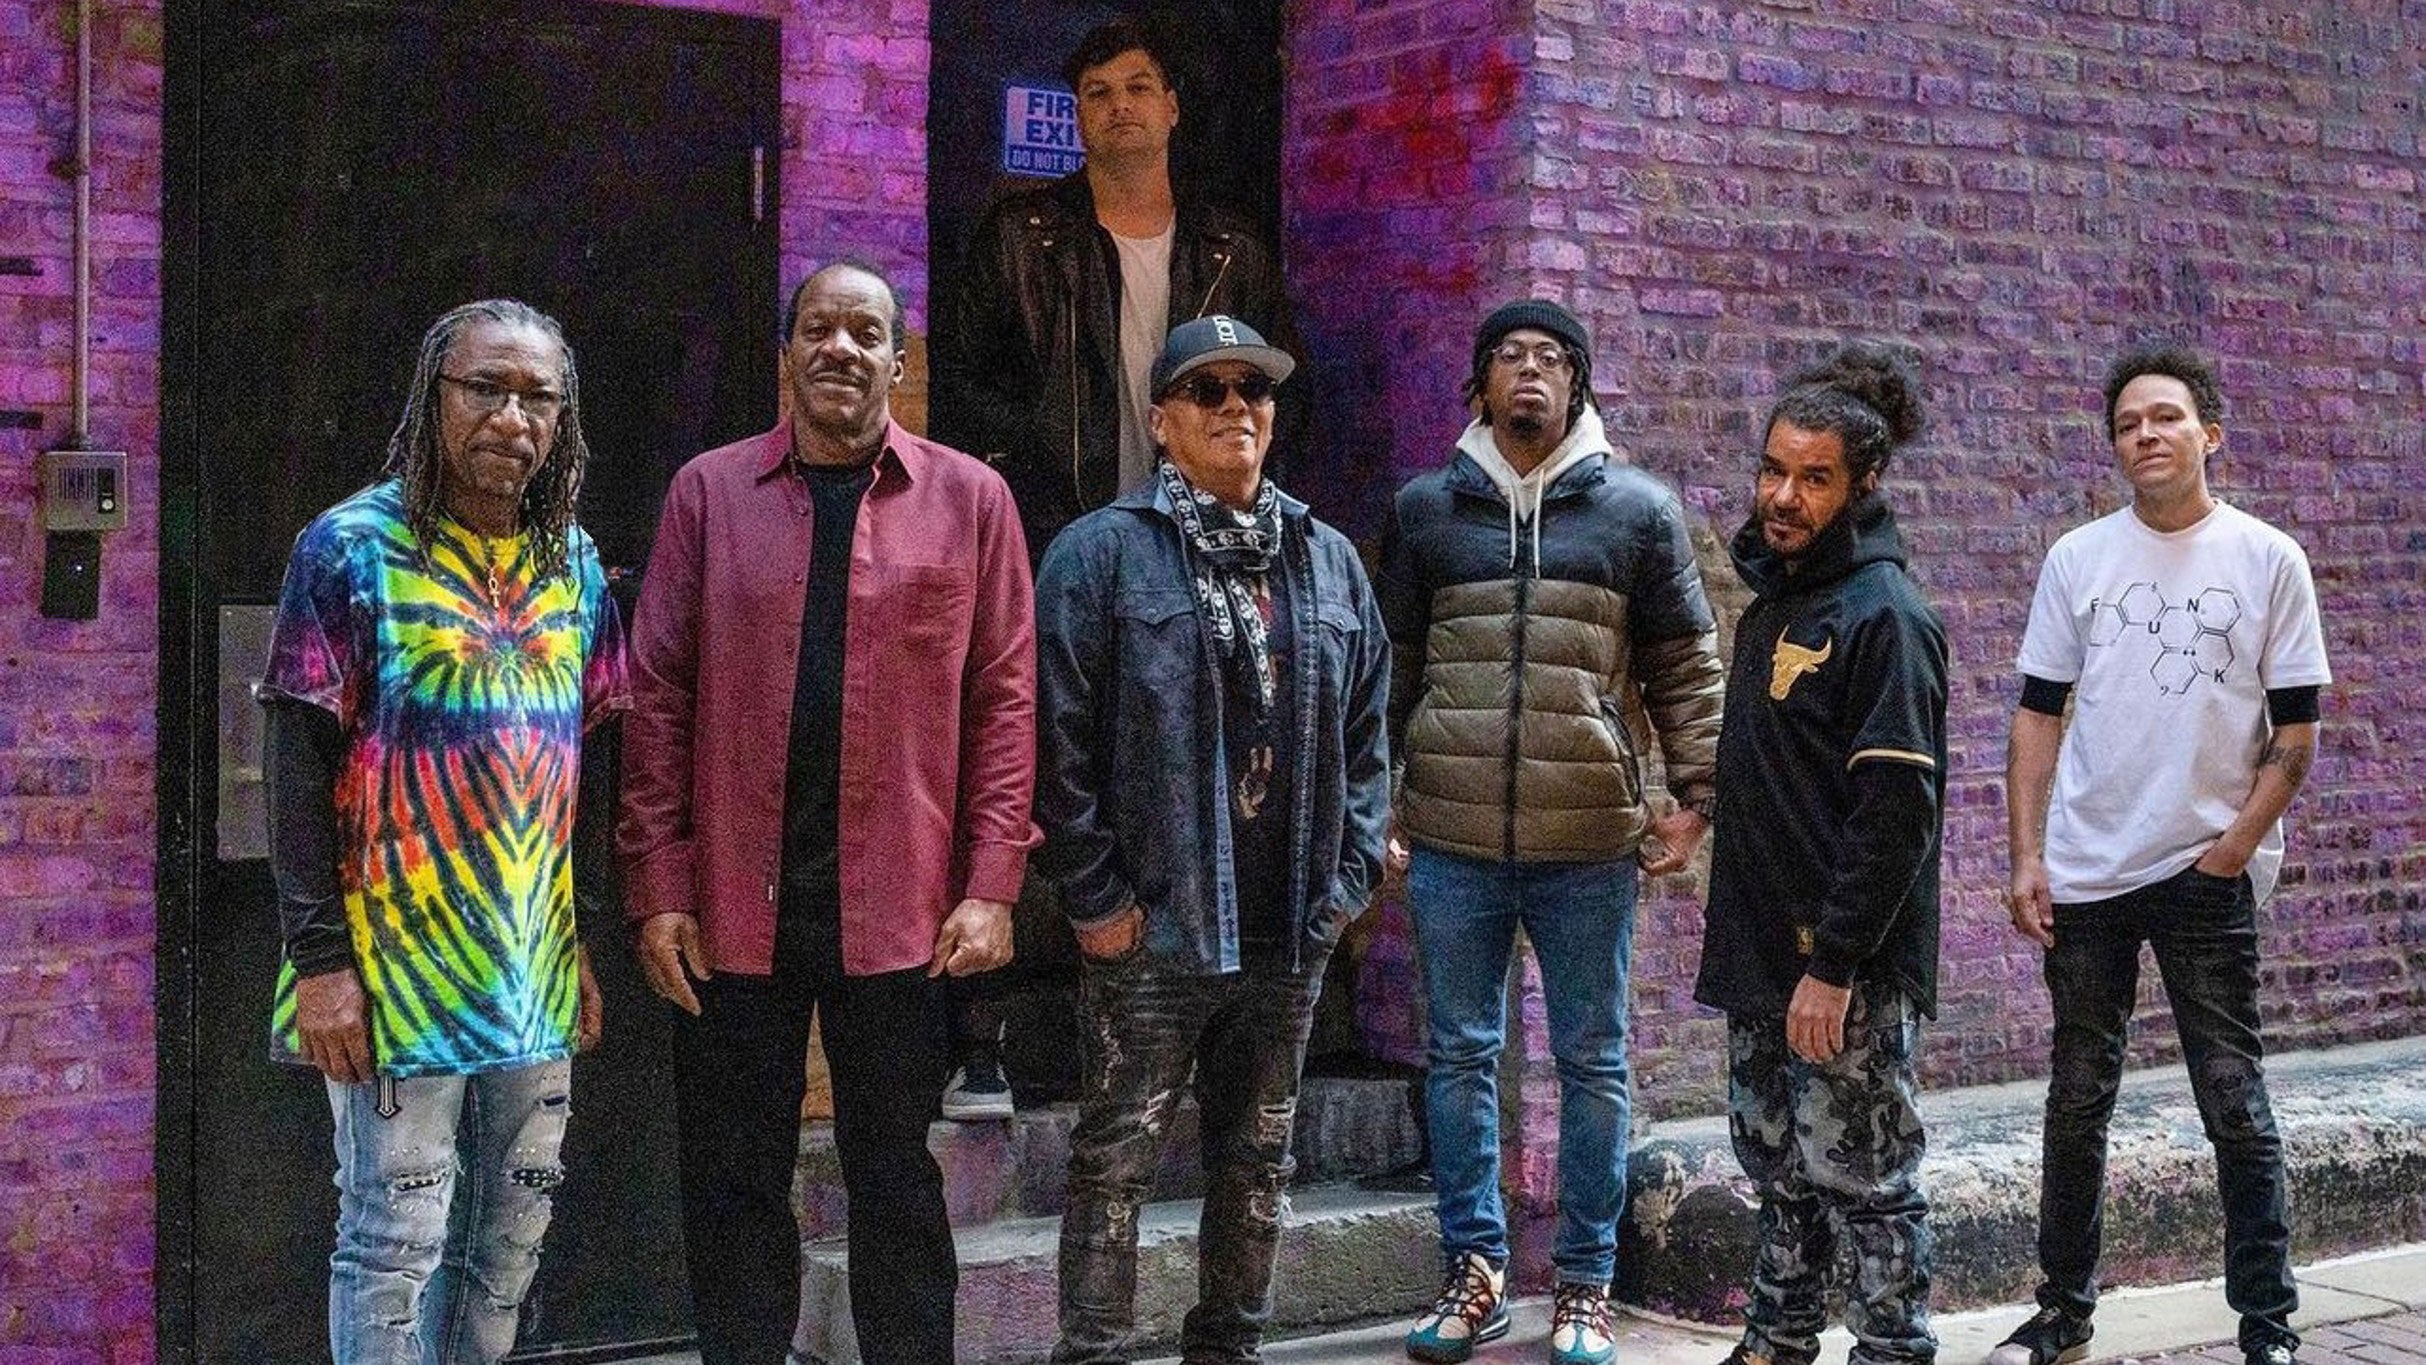 Official Tedeschi Trucks Band After Party featuring Dumpstaphunk presale password for show tickets in Atlantic City, NJ (Sound Waves at Hard Rock Hotel & Casino Atlantic City)